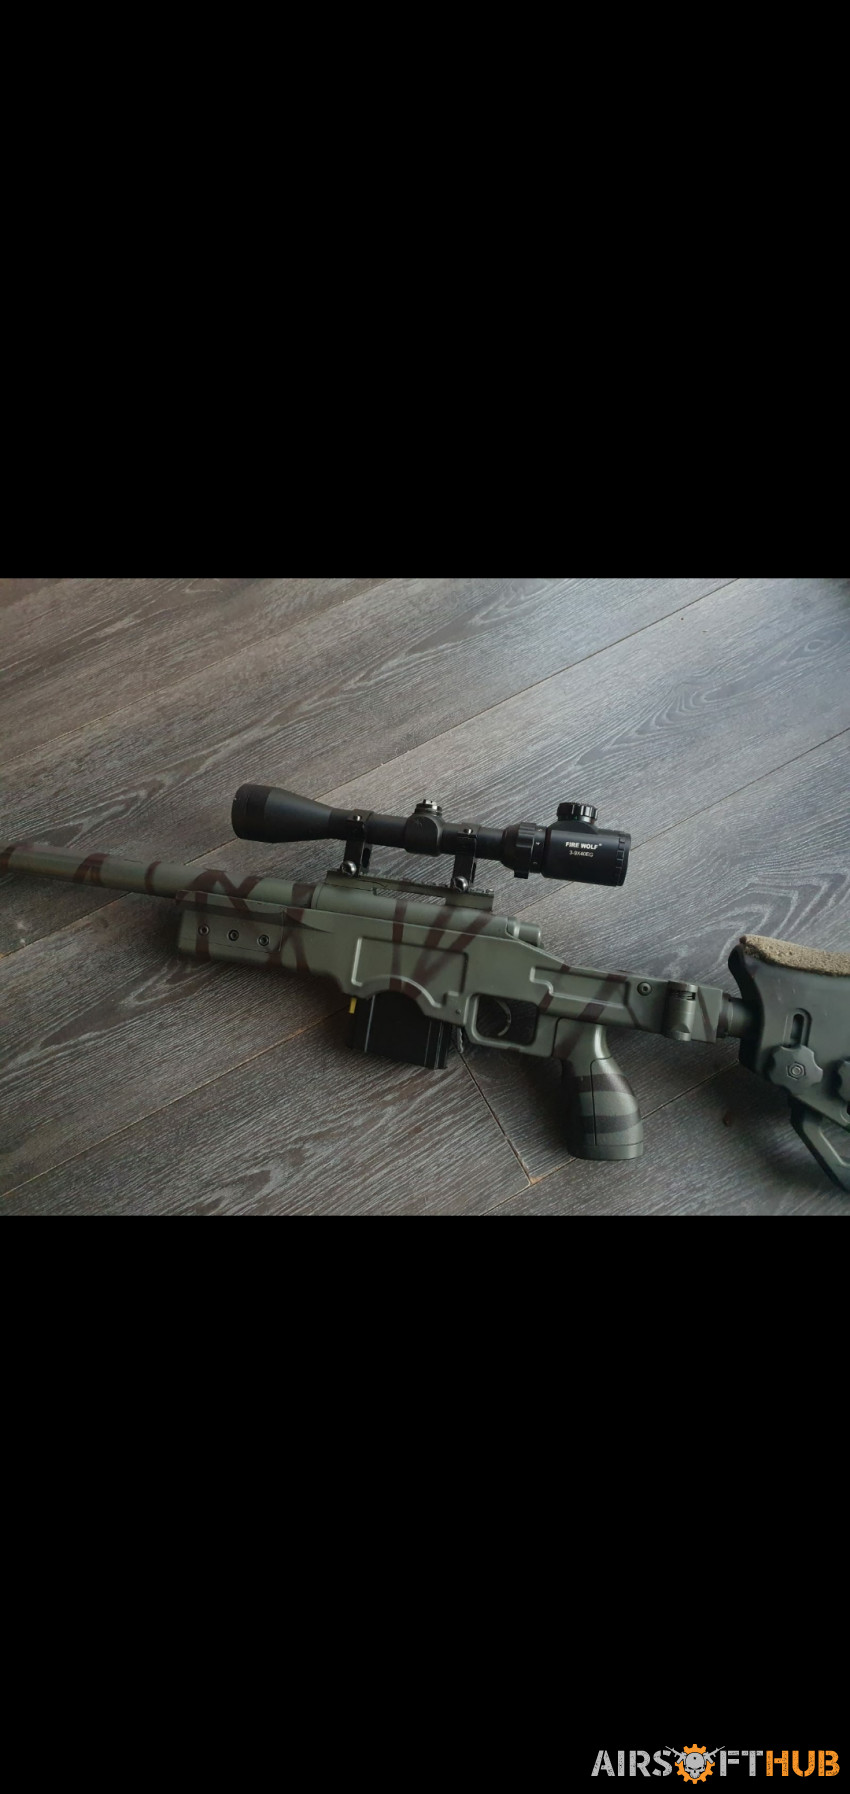 Sniper rifle well mb4411 - Used airsoft equipment